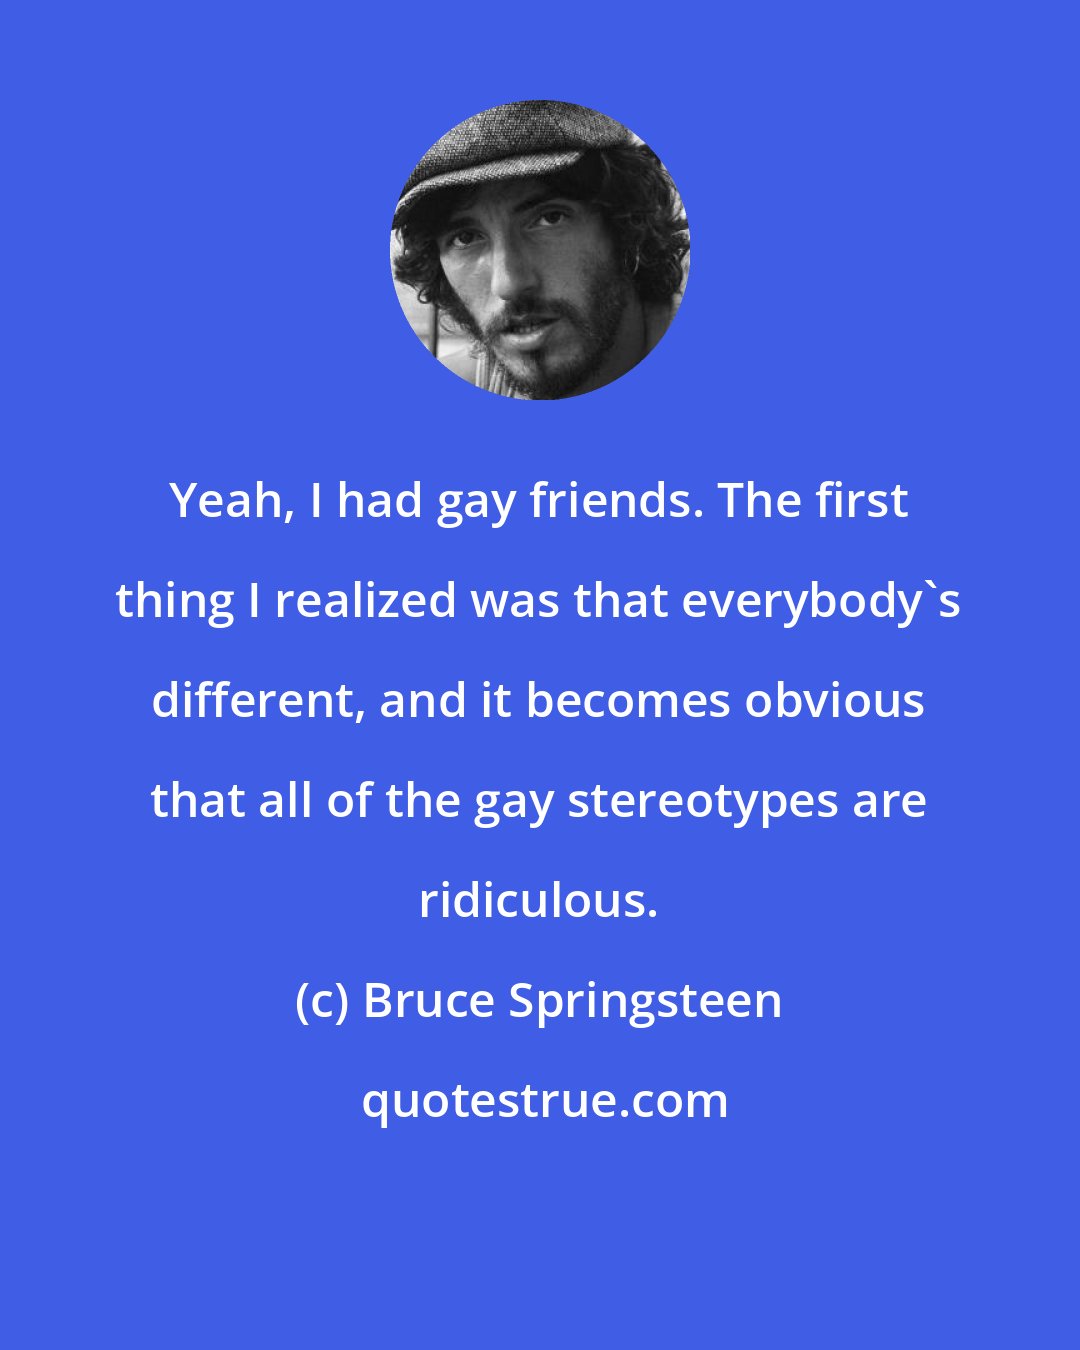 Bruce Springsteen: Yeah, I had gay friends. The first thing I realized was that everybody's different, and it becomes obvious that all of the gay stereotypes are ridiculous.